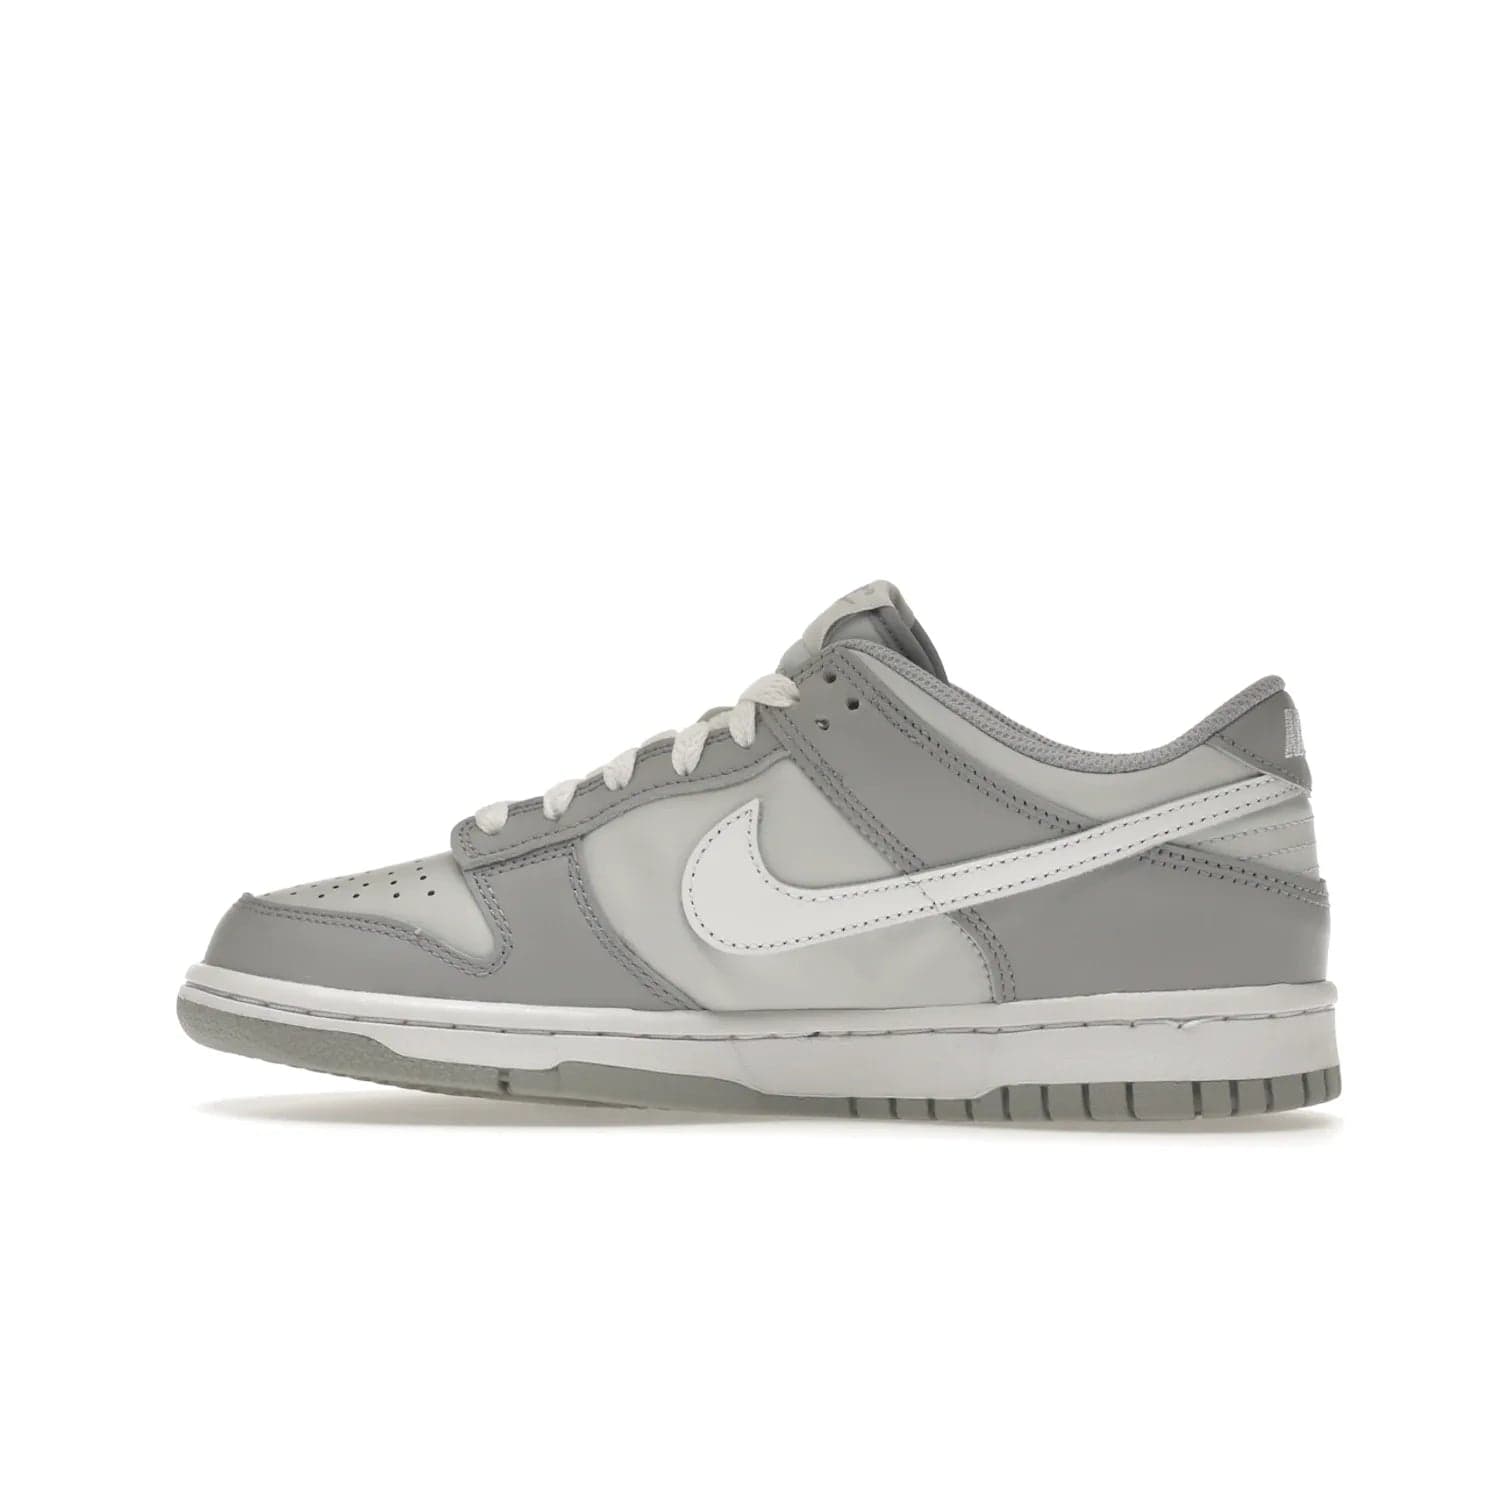 Nike Dunk Low Two-Toned Grey (GS) - Image 20 - Only at www.BallersClubKickz.com - Stylish Nike Dunk Low GS Two-Toned Grey featuring leather build, light/dark grey shades, white Swoosh logo & gray rubber outsole. Get ready to make a statement with this timeless classic released in March 2022.